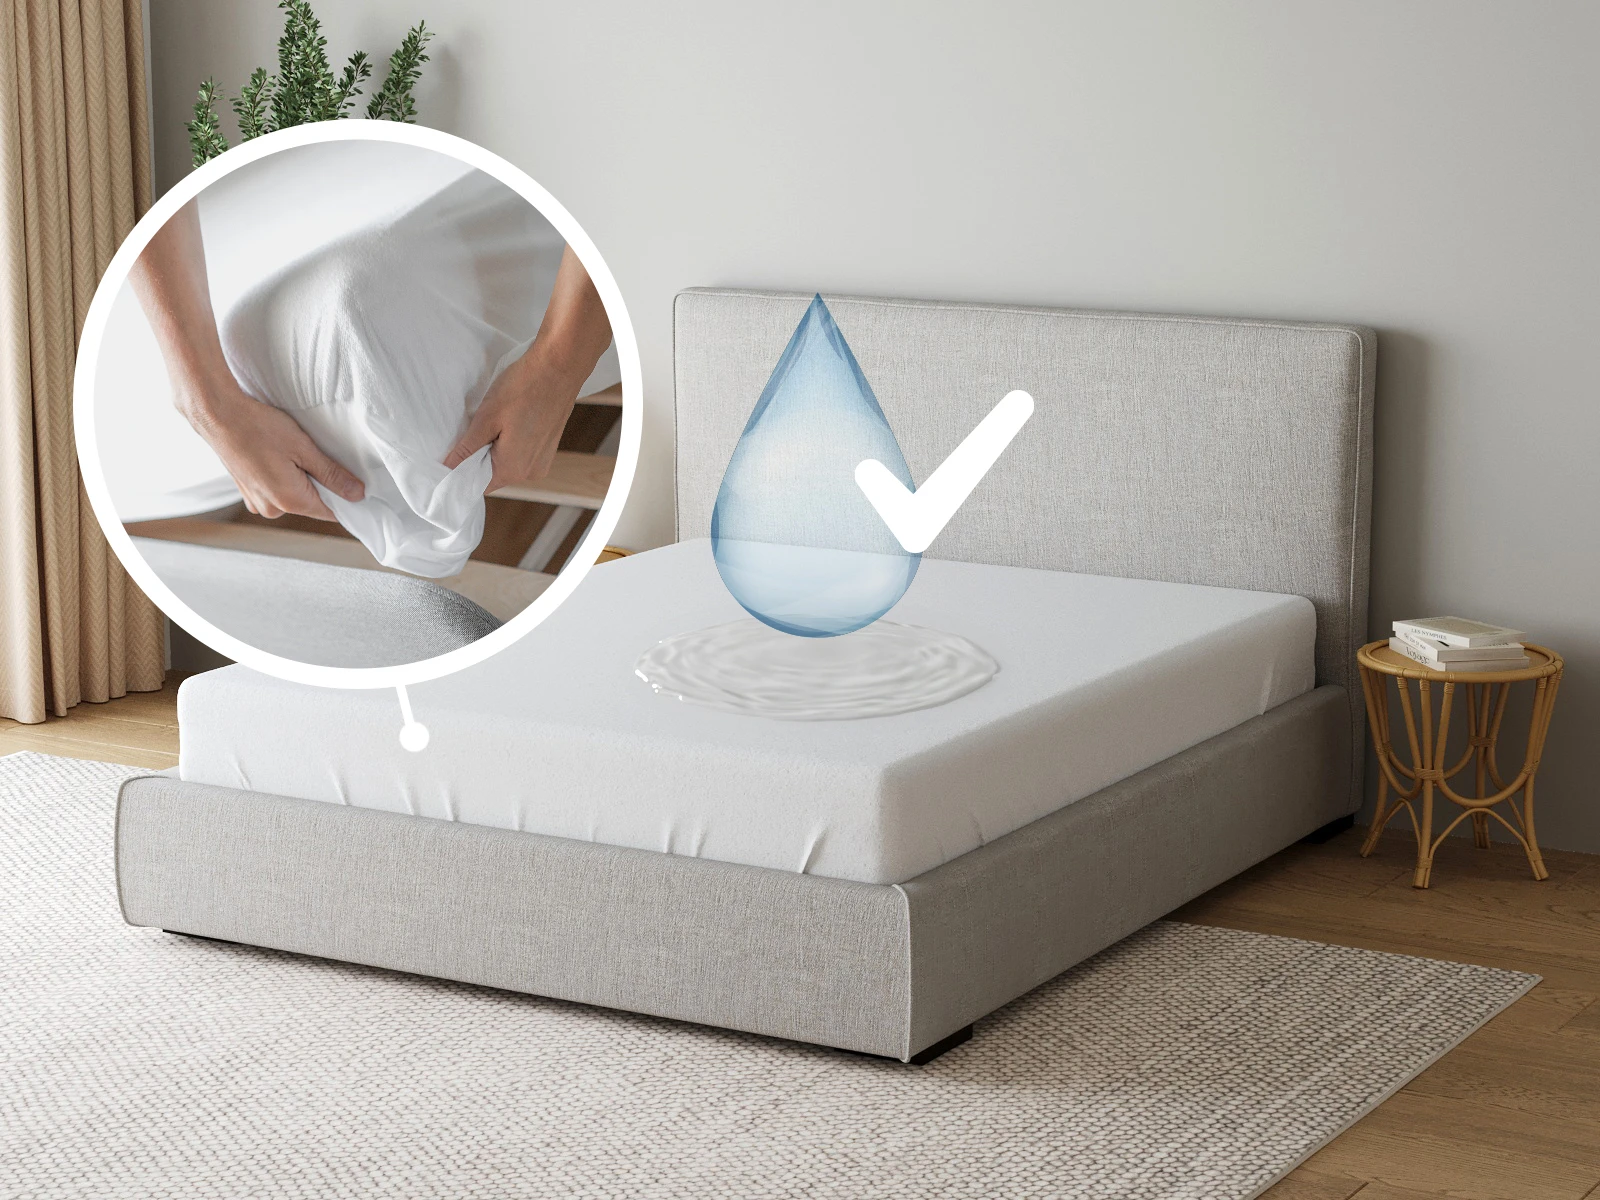 1 Waterproof mattress protector all-round protective cover 140x200 cm